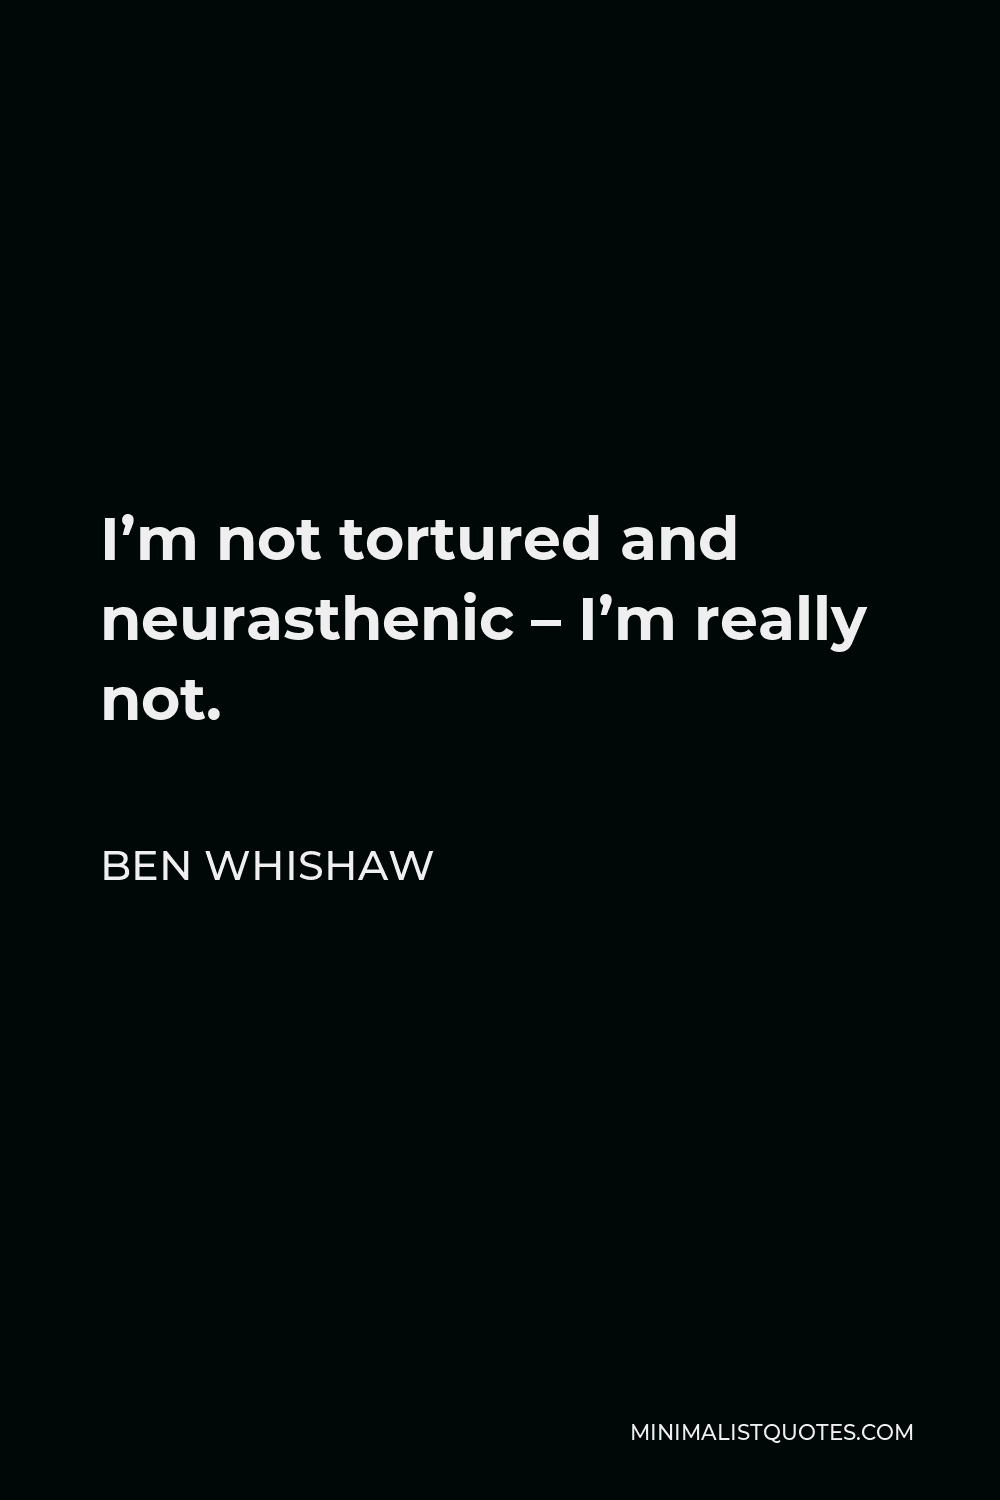 Ben Whishaw Quote - I’m not tortured and neurasthenic – I’m really not.